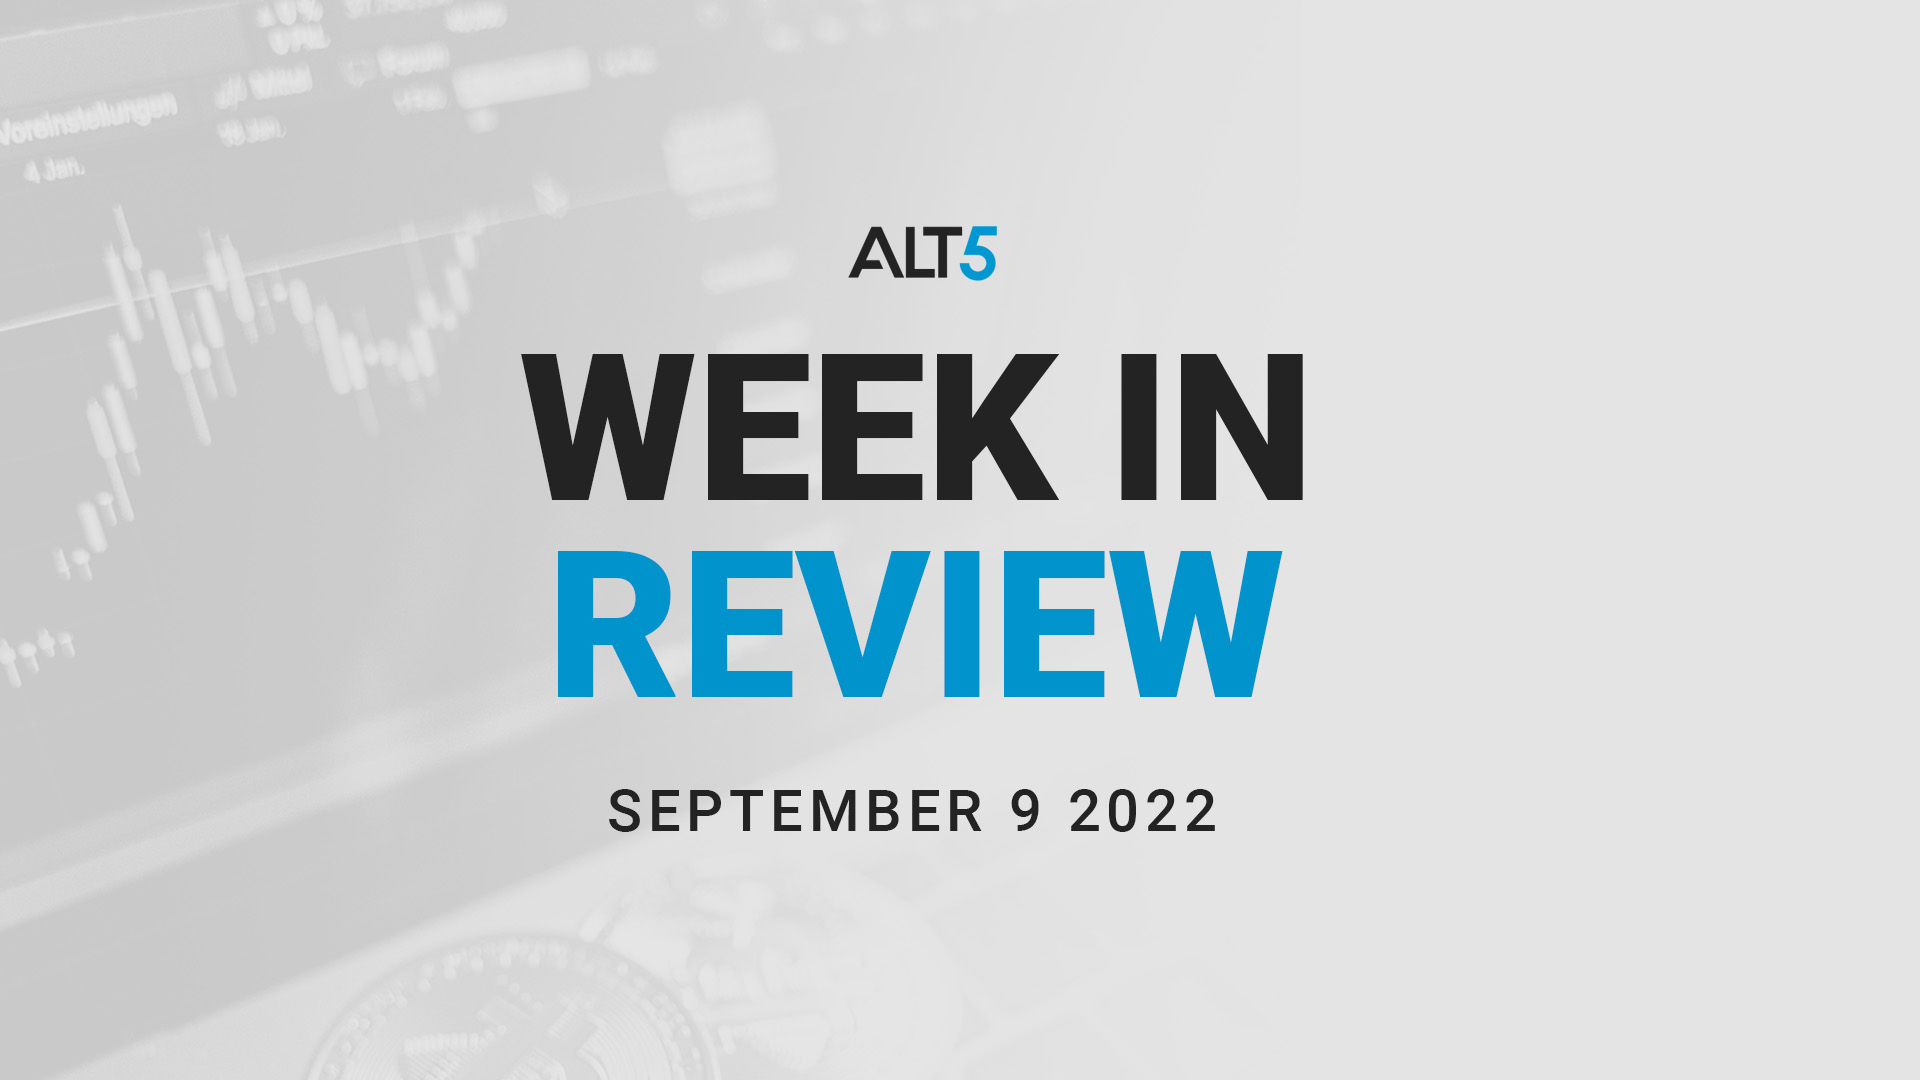 Week in review: September 9 2022 - Will Bitcoin stay above the $20k level?